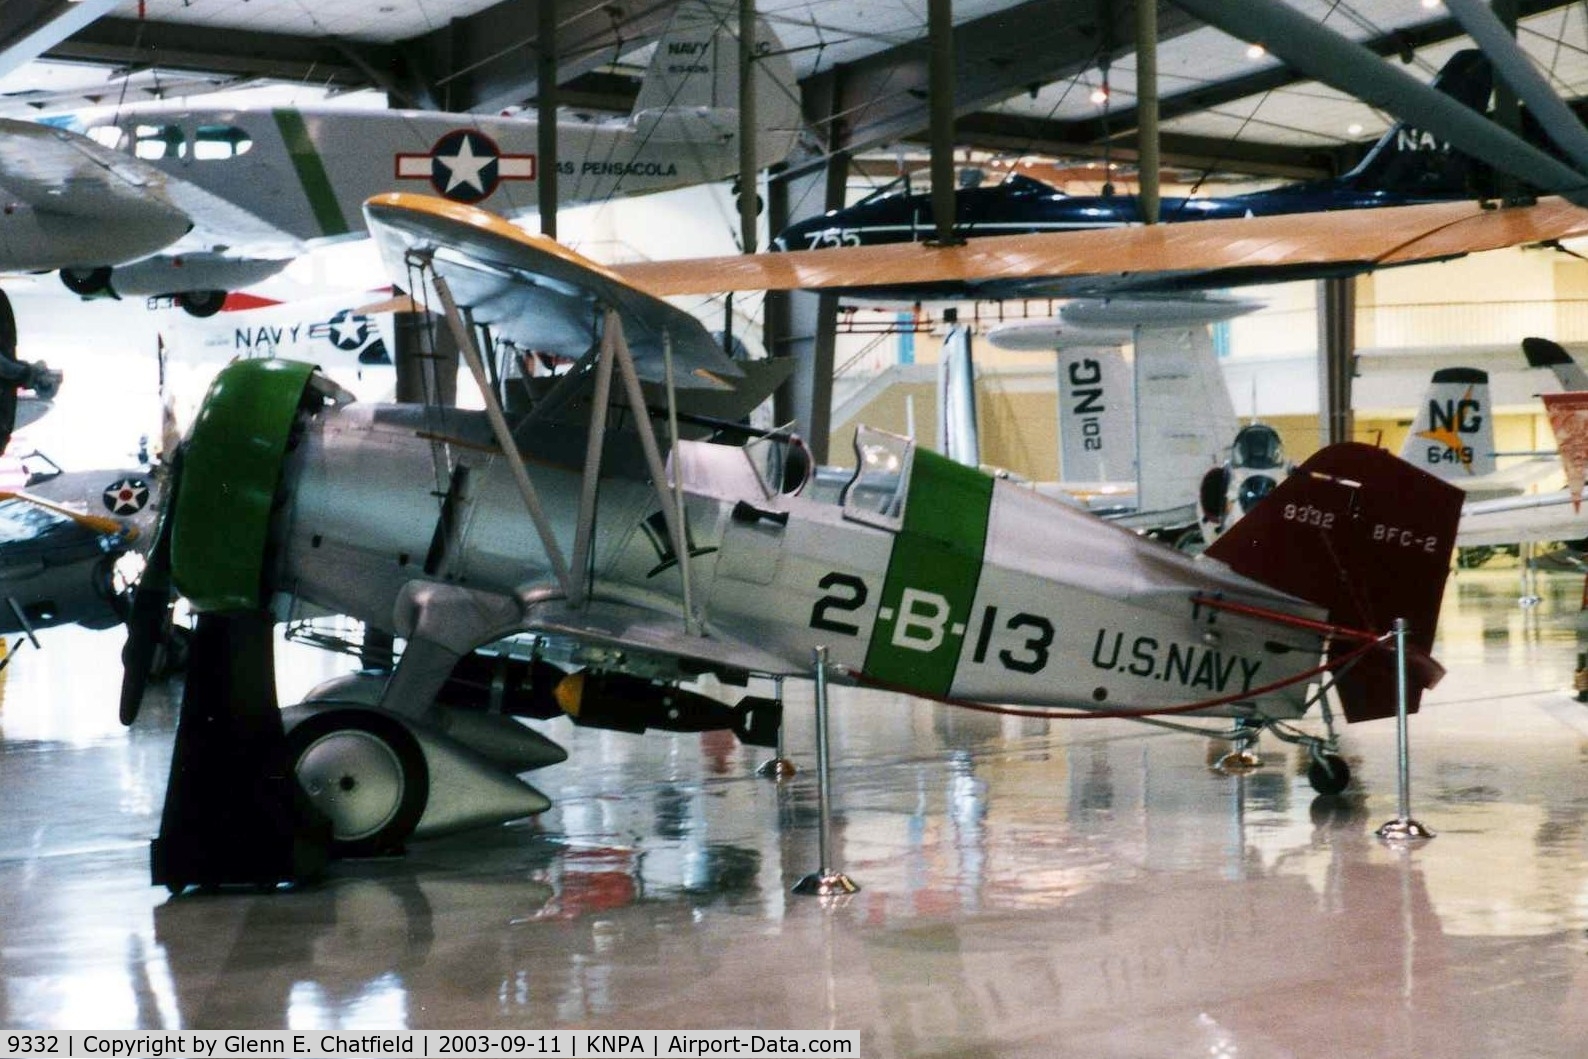 9332, 1937 Curtiss BFC-2 Goshawk C/N Not found 9332, F11C-2/BFC-2 at the National Museum of Naval Aviation